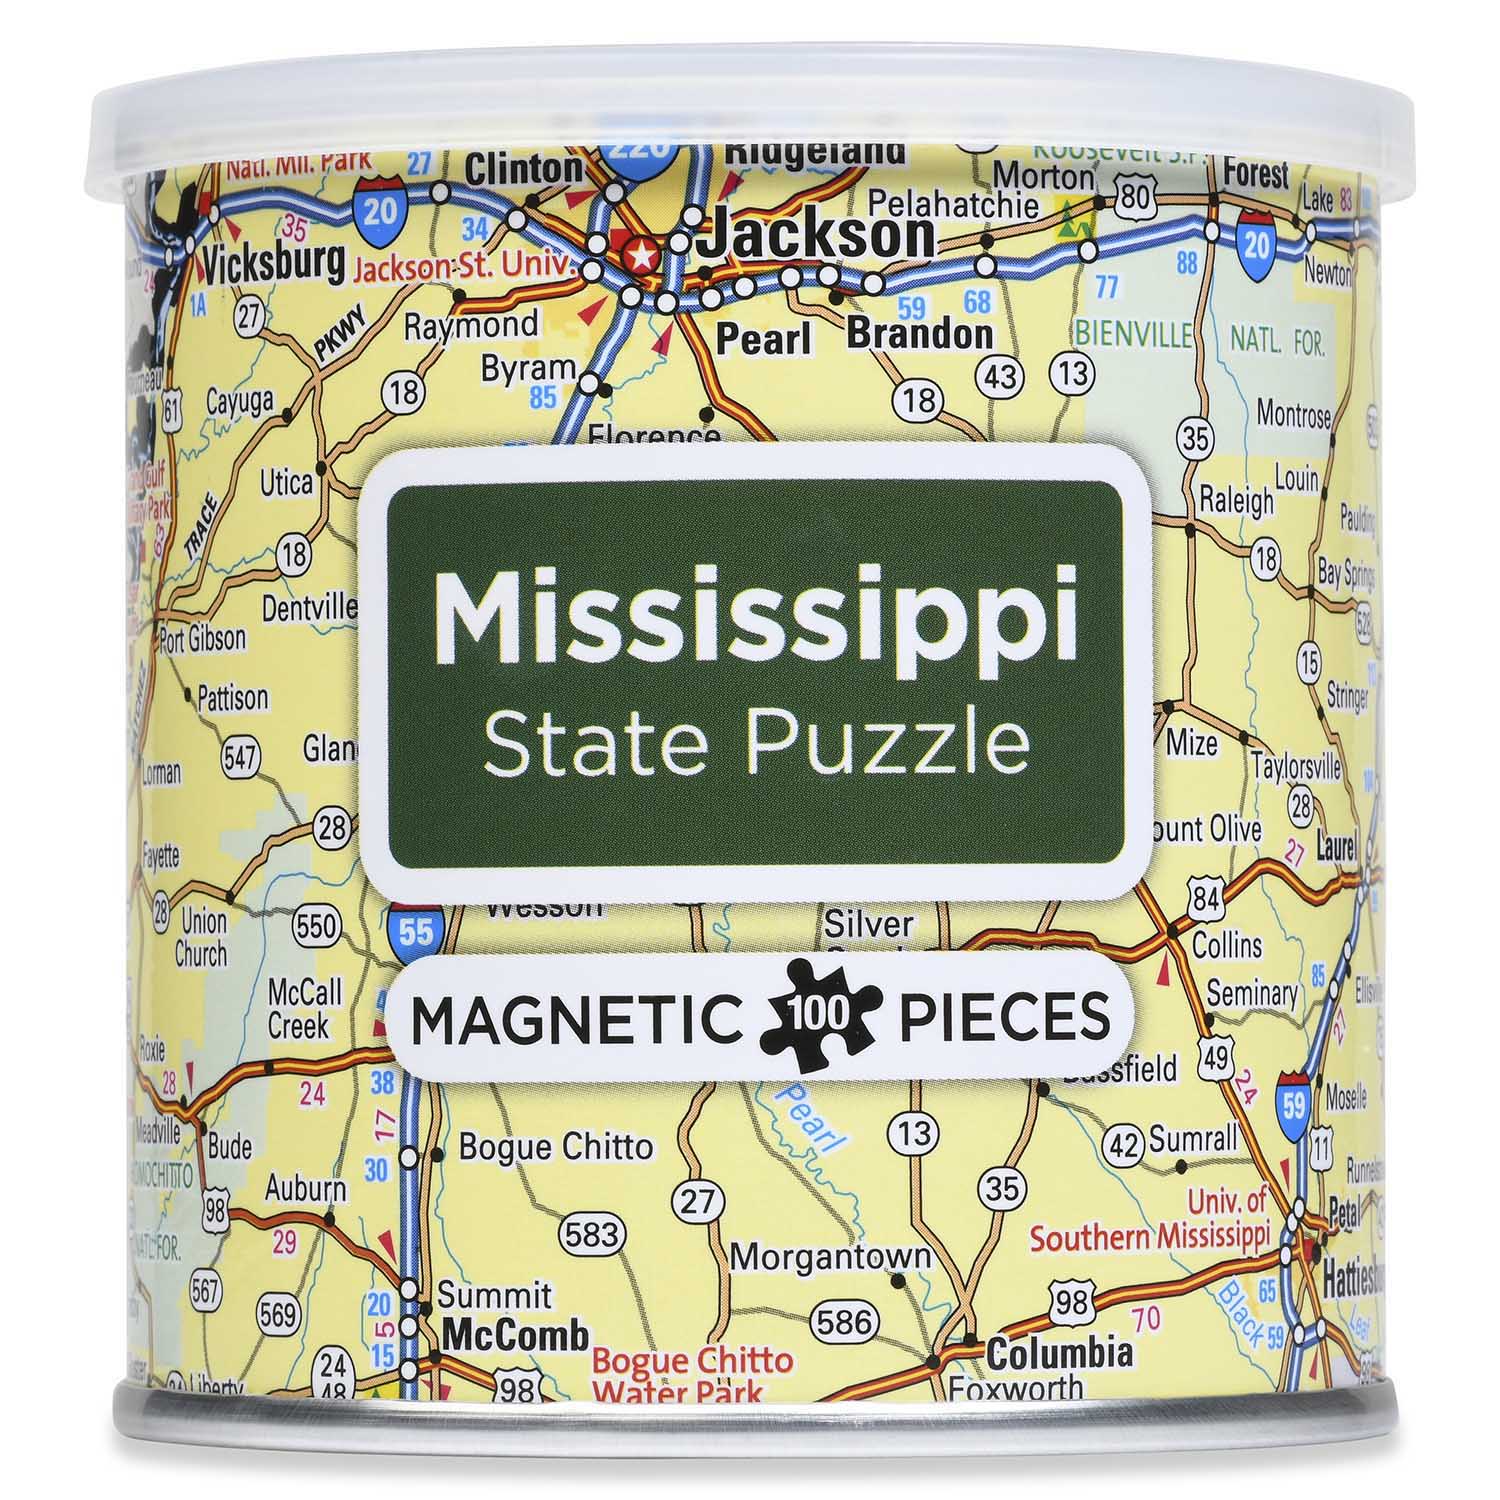 City Magnetic Puzzle Mississippi Cities Jigsaw Puzzle